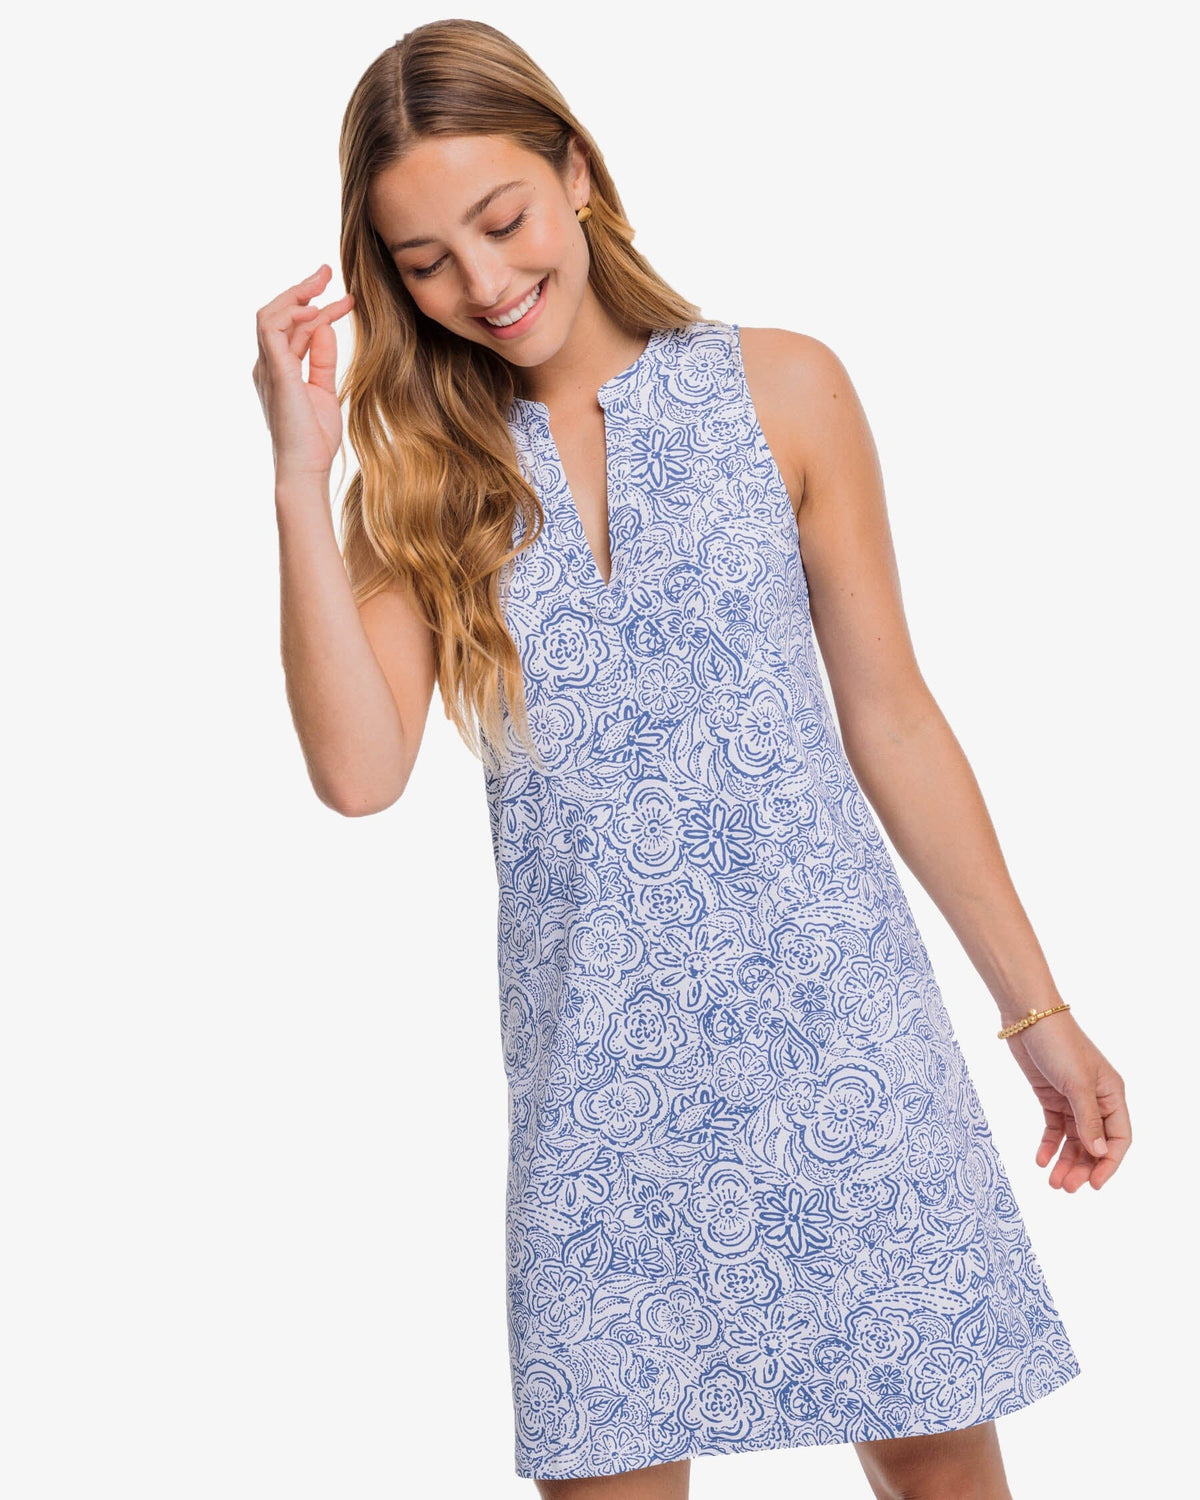 Active & Athletic Women's Performance Dresses | Southern Tide